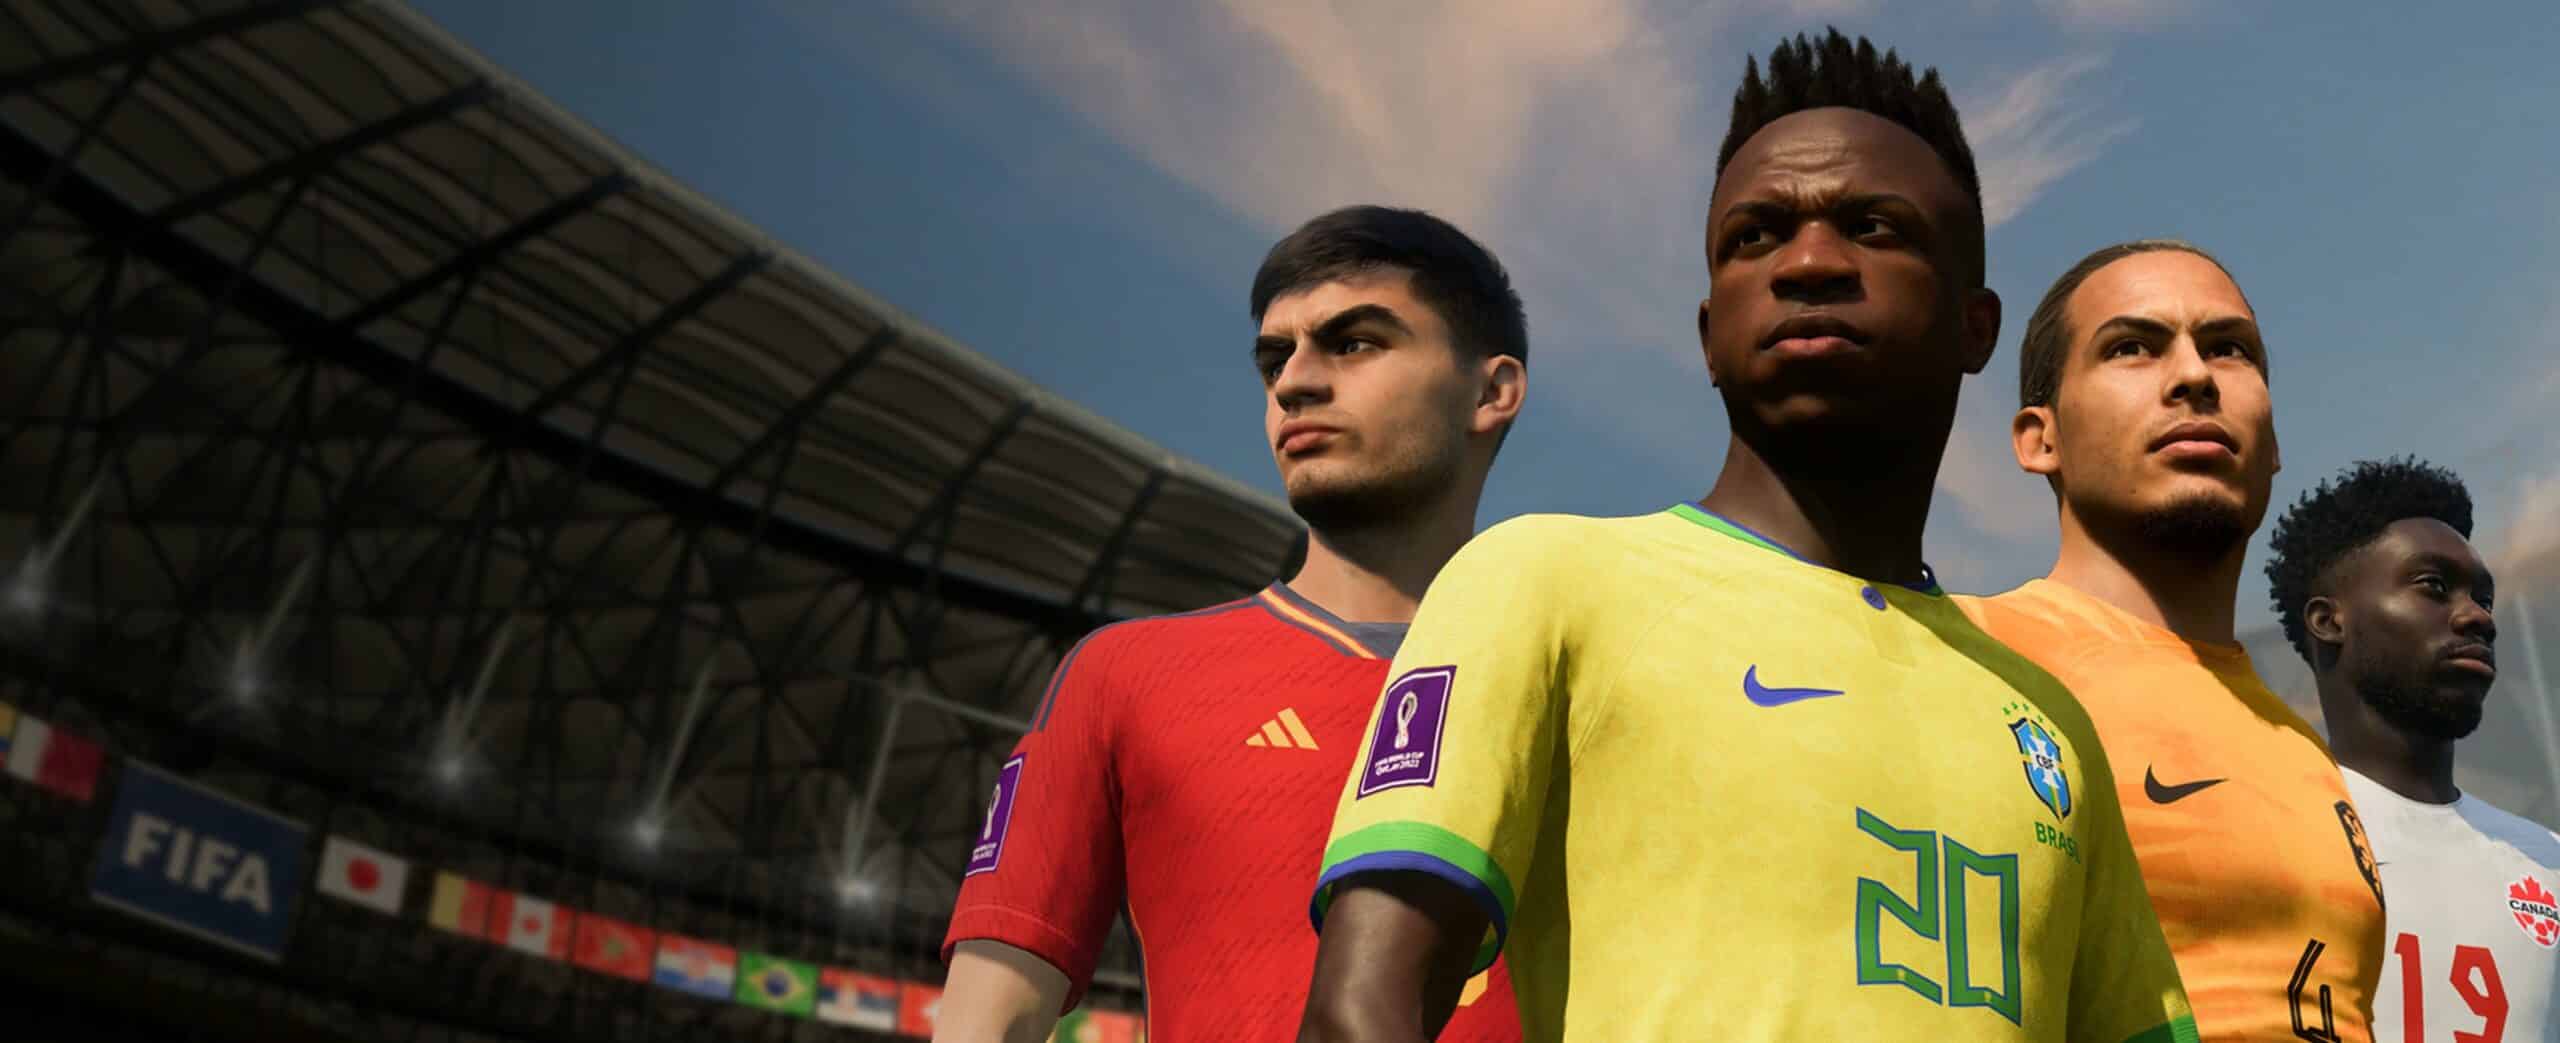 Ea sports unveils all-new fifa world cup 2022™ updates coming to fifa 23